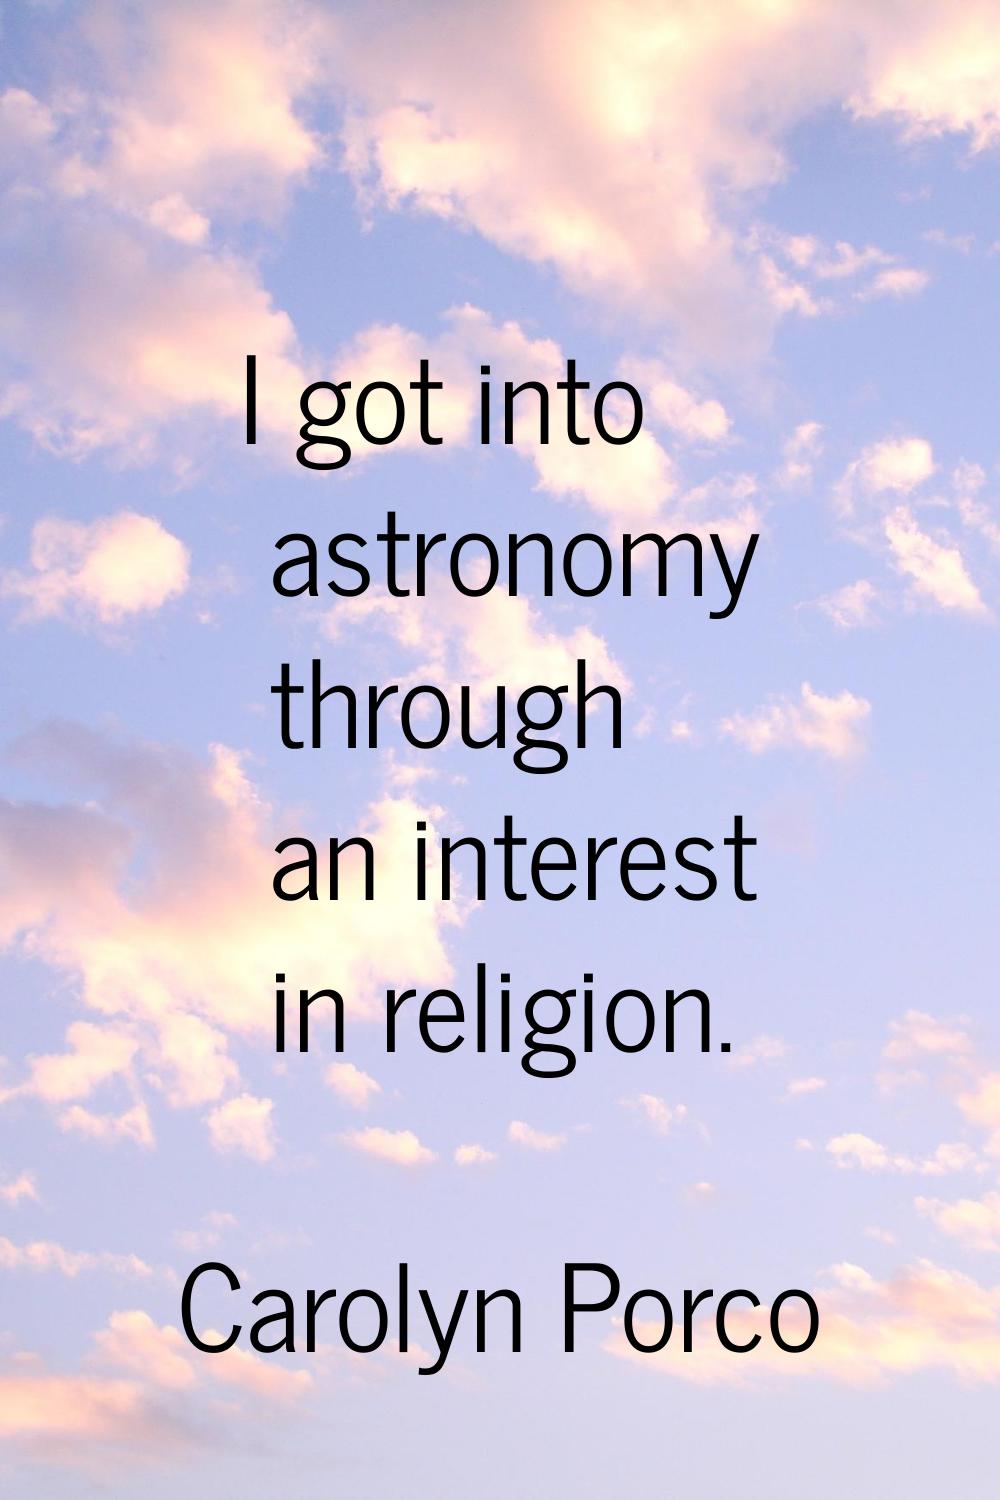 I got into astronomy through an interest in religion.